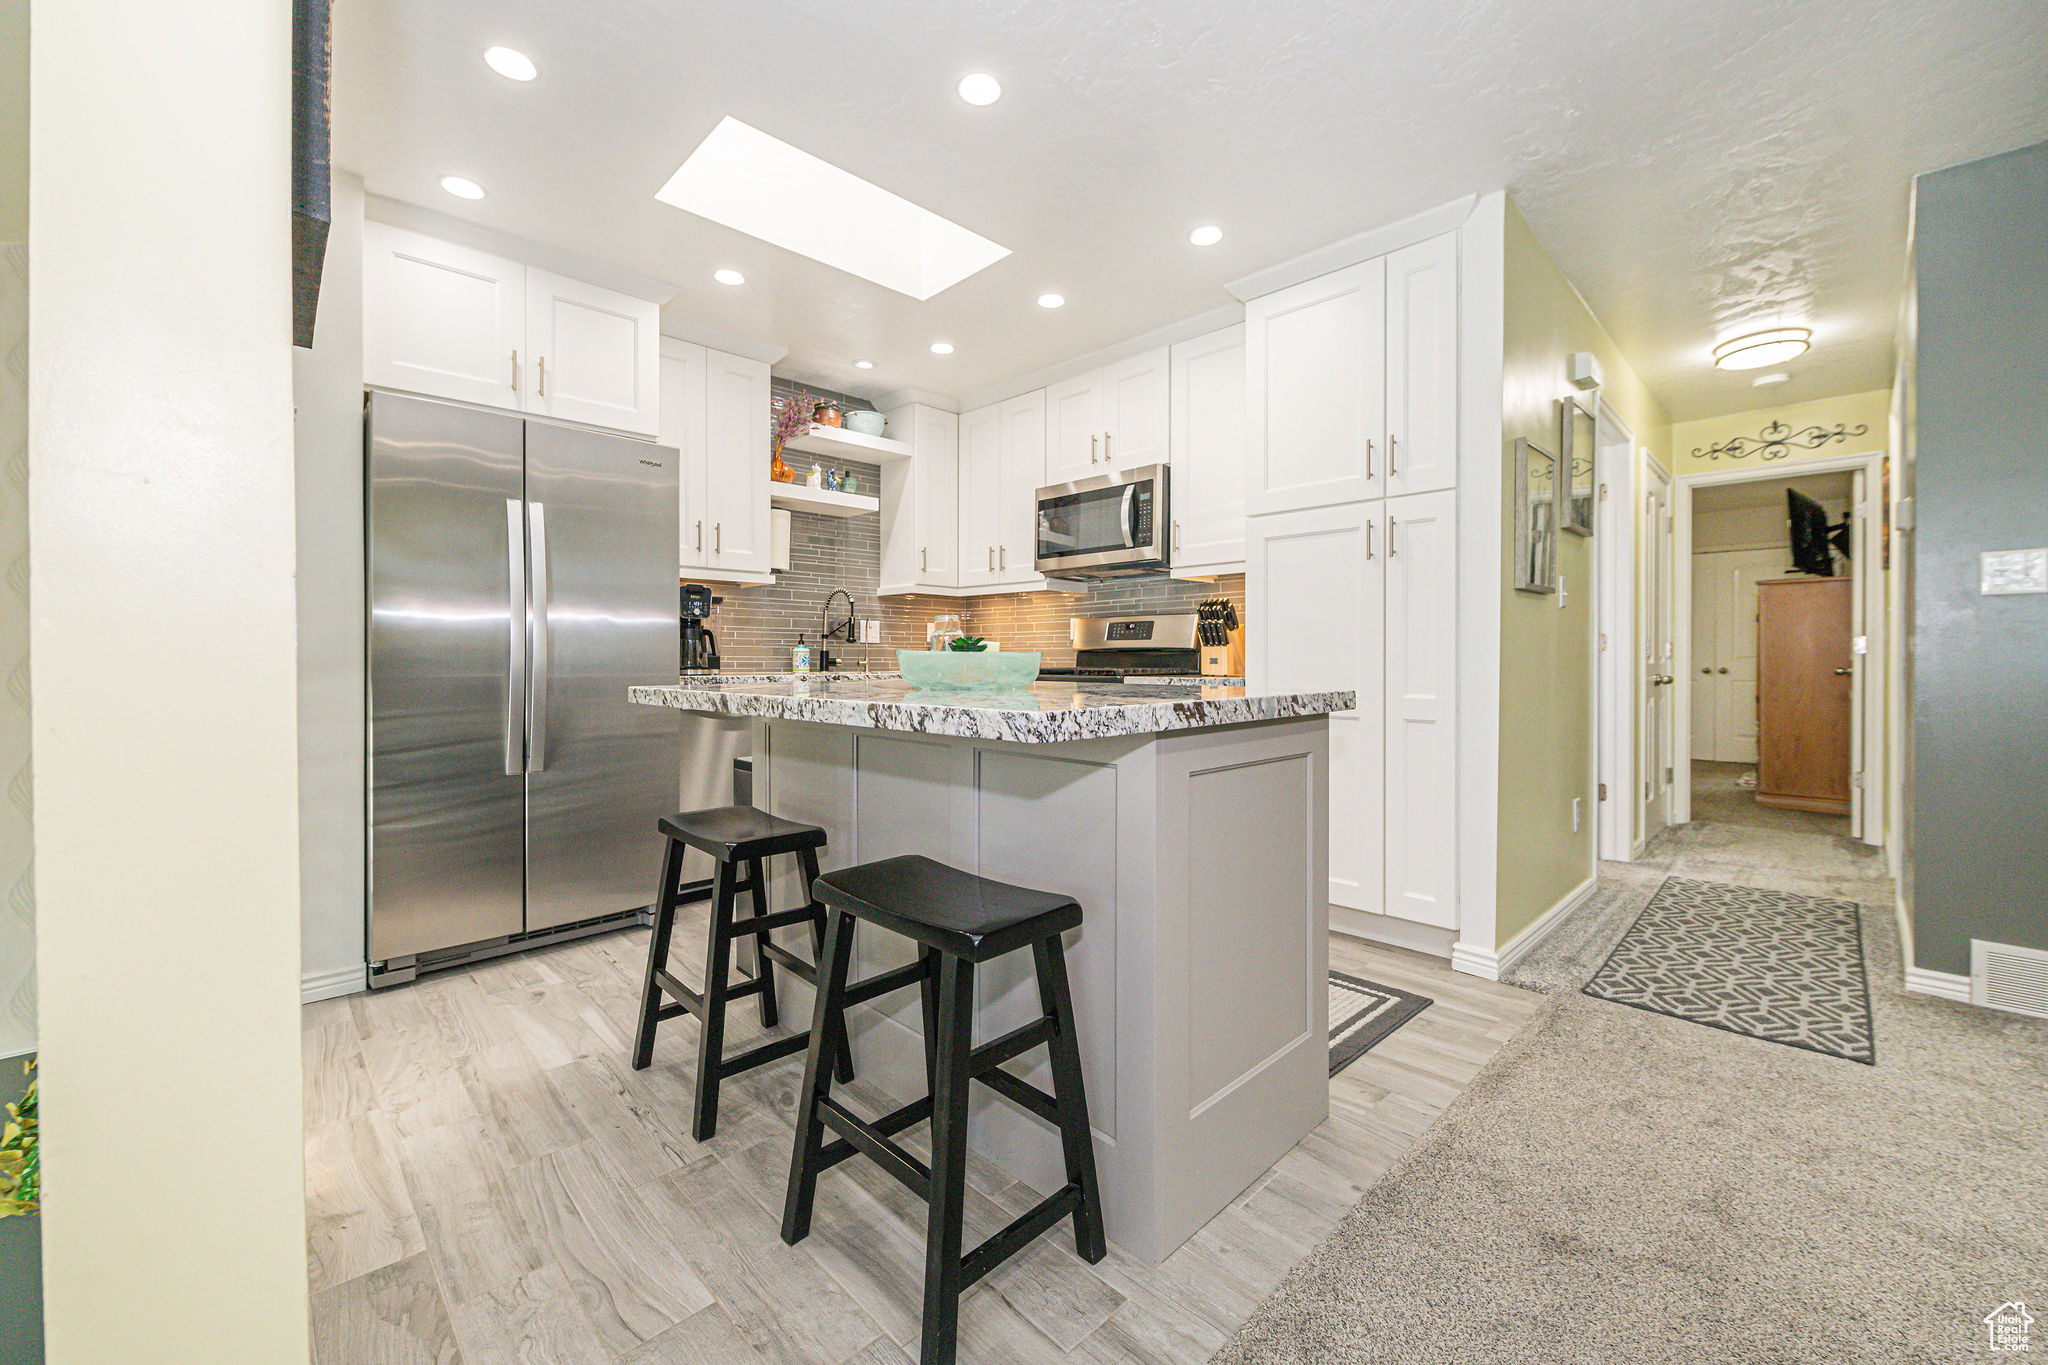 Kitchen with a skylight, tasteful backsplash, stainless steel appliances, and white cabinets